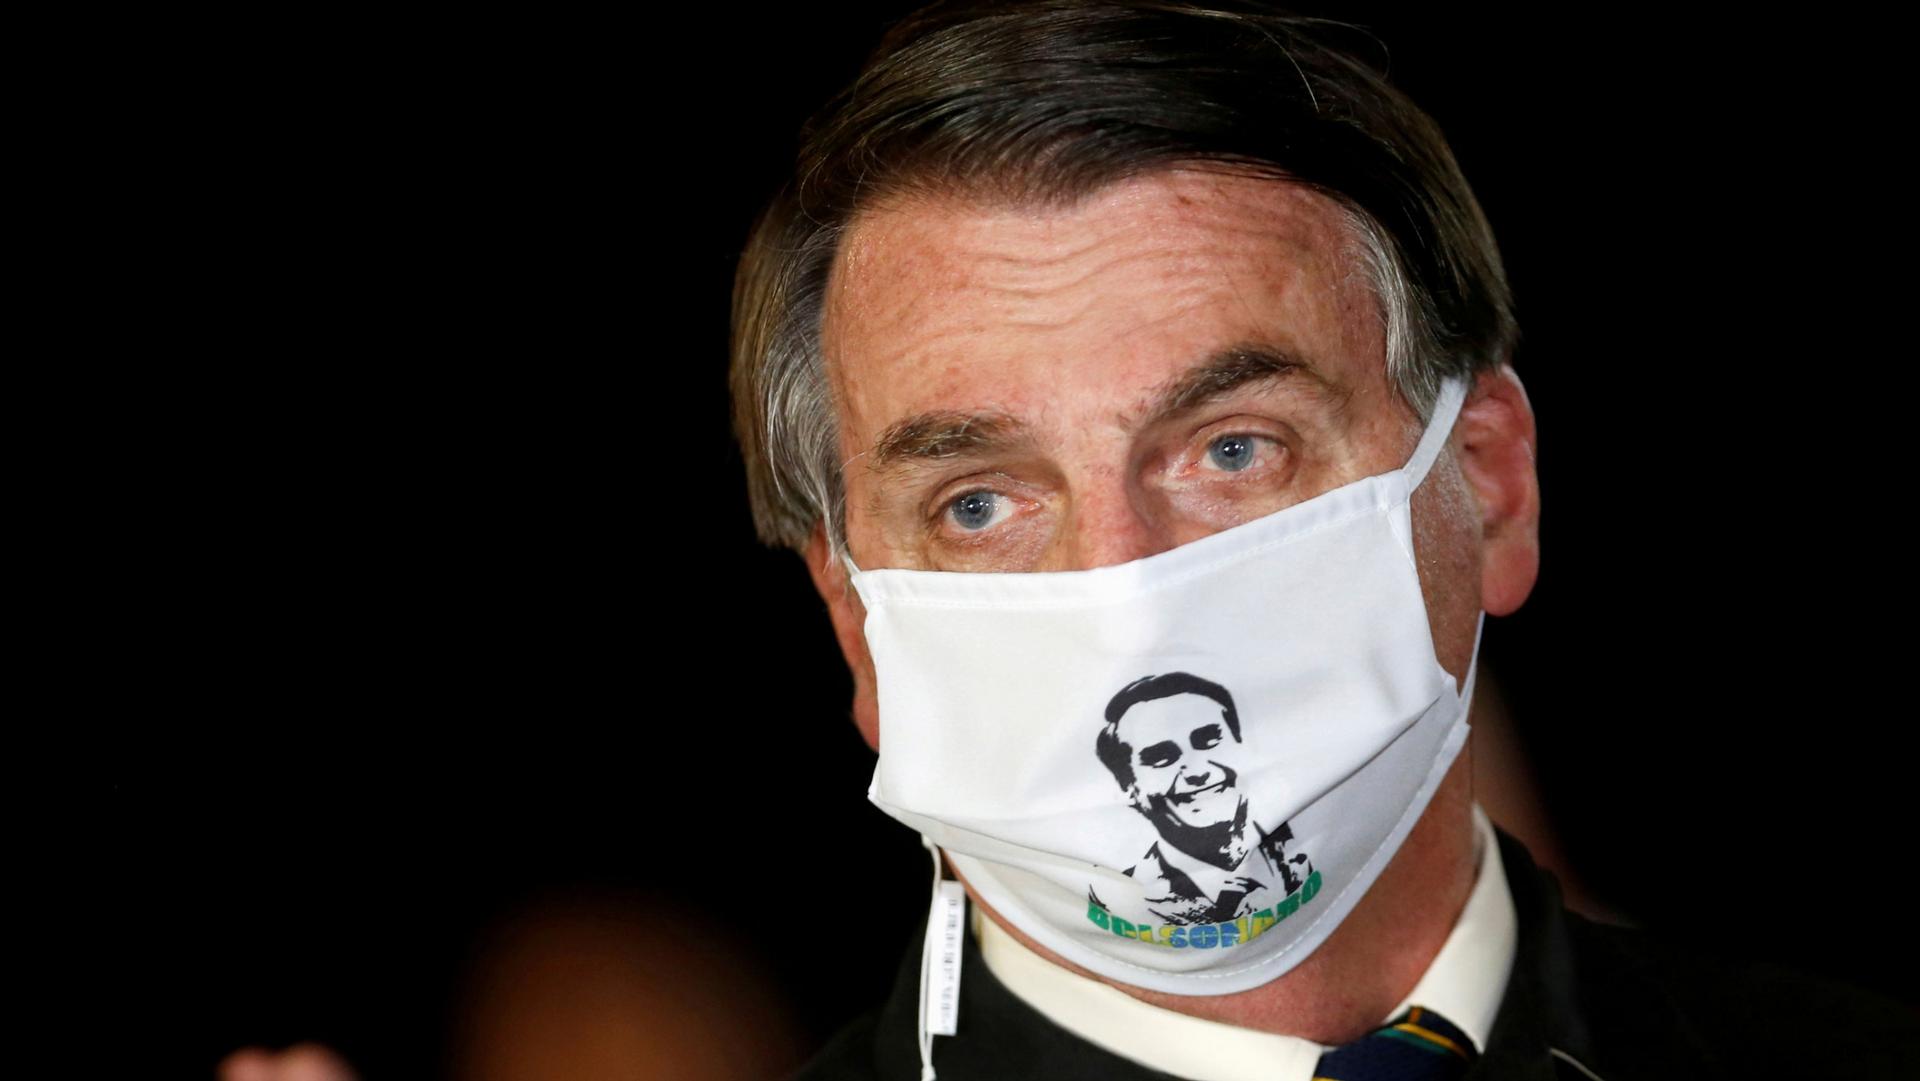 Brazil's President Jair Bolsonaro is shown wearing a white mask with his face printed on it.